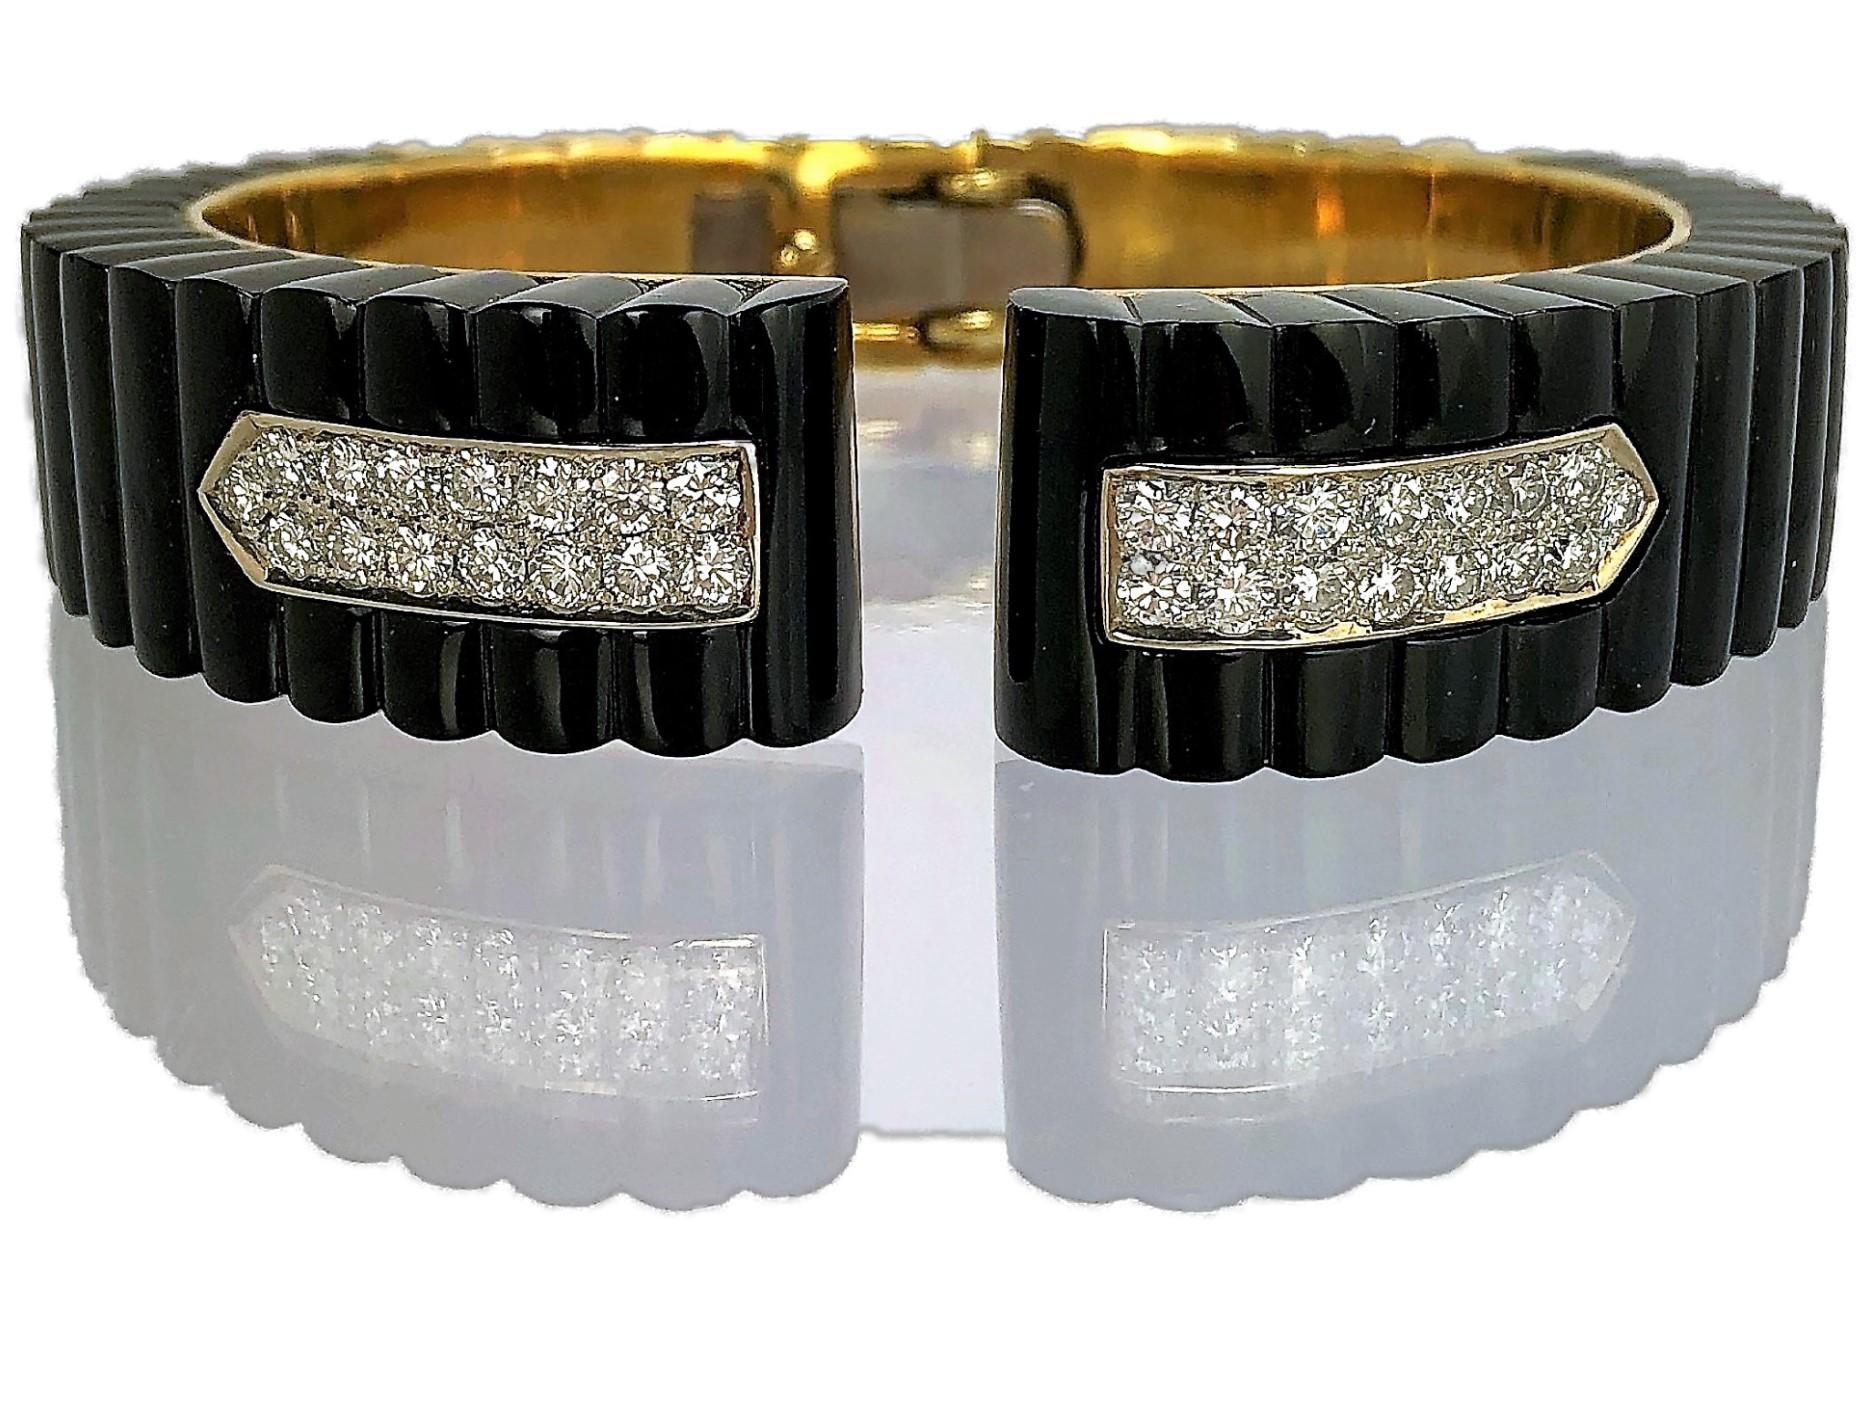 Fashioned in 18k yellow gold, this ultra chic split front cuff sports two fluted
onyx sections in the front, set with 30 diamonds weighing an approximate
total of 2.15CT of overall G Color and VS1 Clarity.  The back panel is gold
and continues the